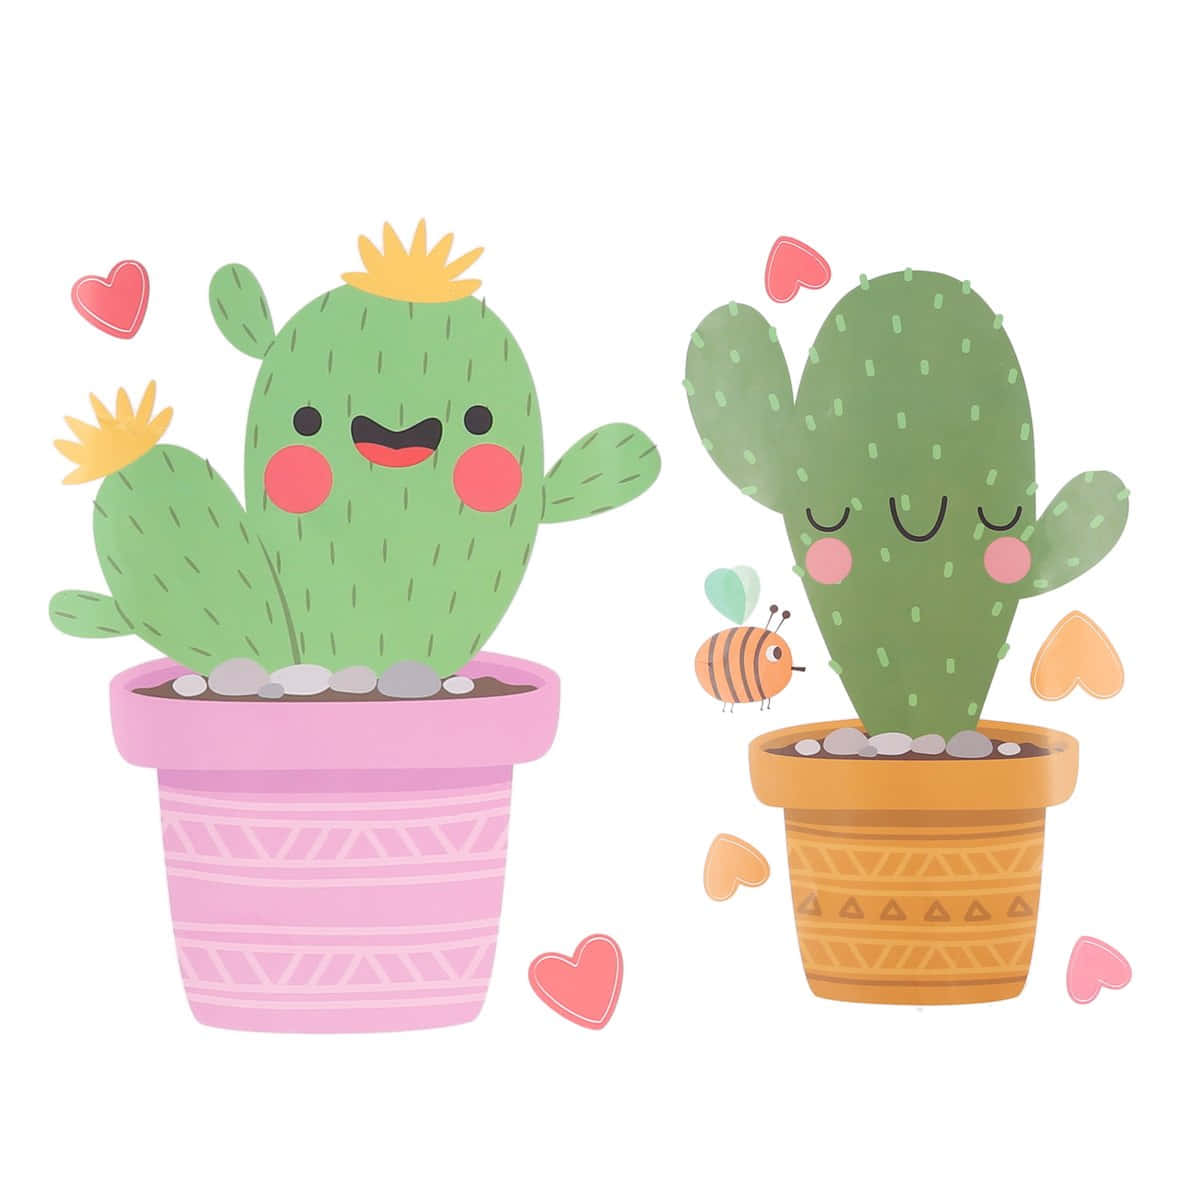 A Brightly Smiling Cactus Full Of Spikes And Character Background